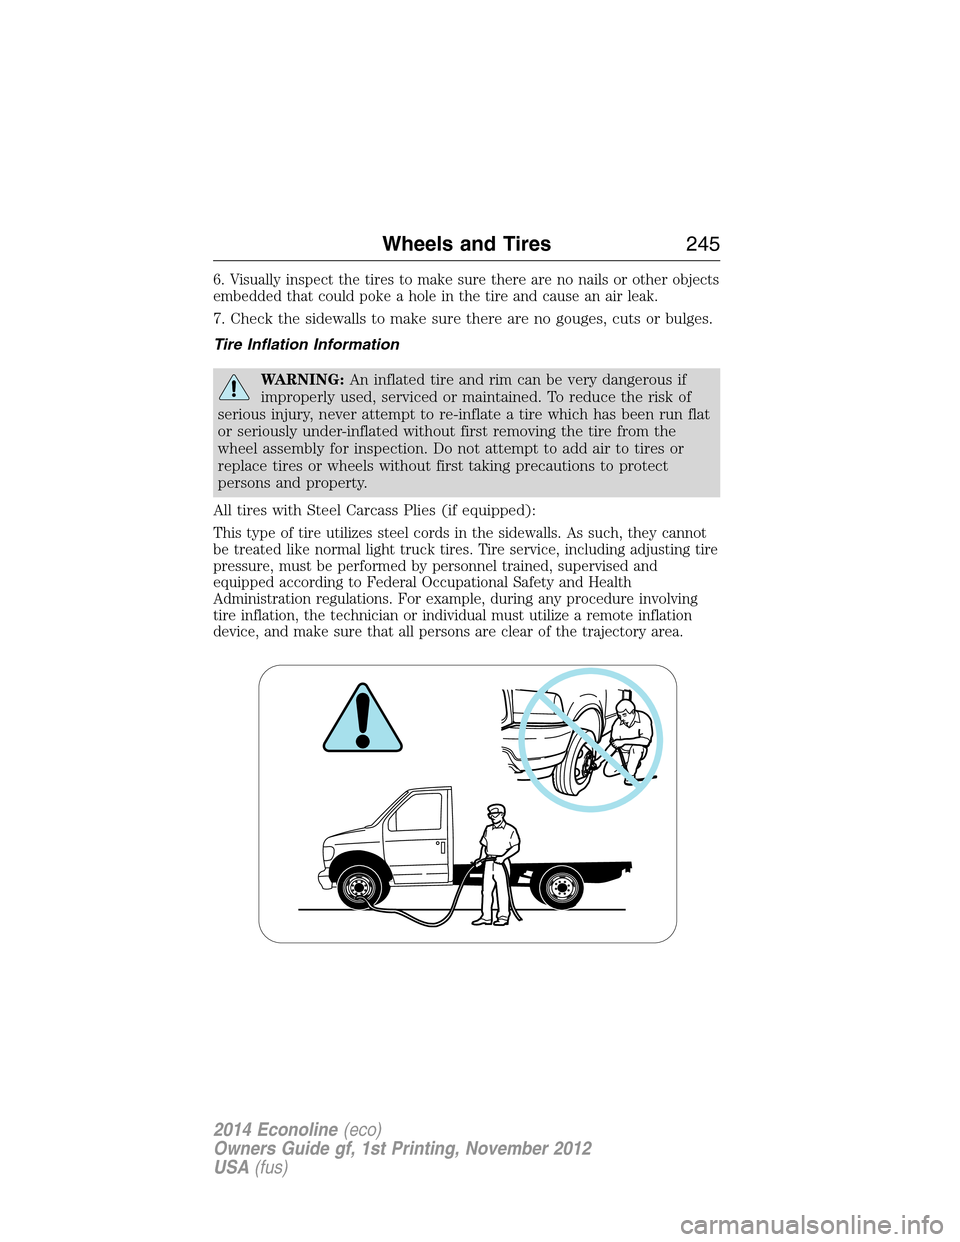 FORD E SERIES 2014 4.G User Guide 6. Visually inspect the tires to make sure there are no nails or other objects
embedded that could poke a hole in the tire and cause an air leak.
7. Check the sidewalls to make sure there are no gouge